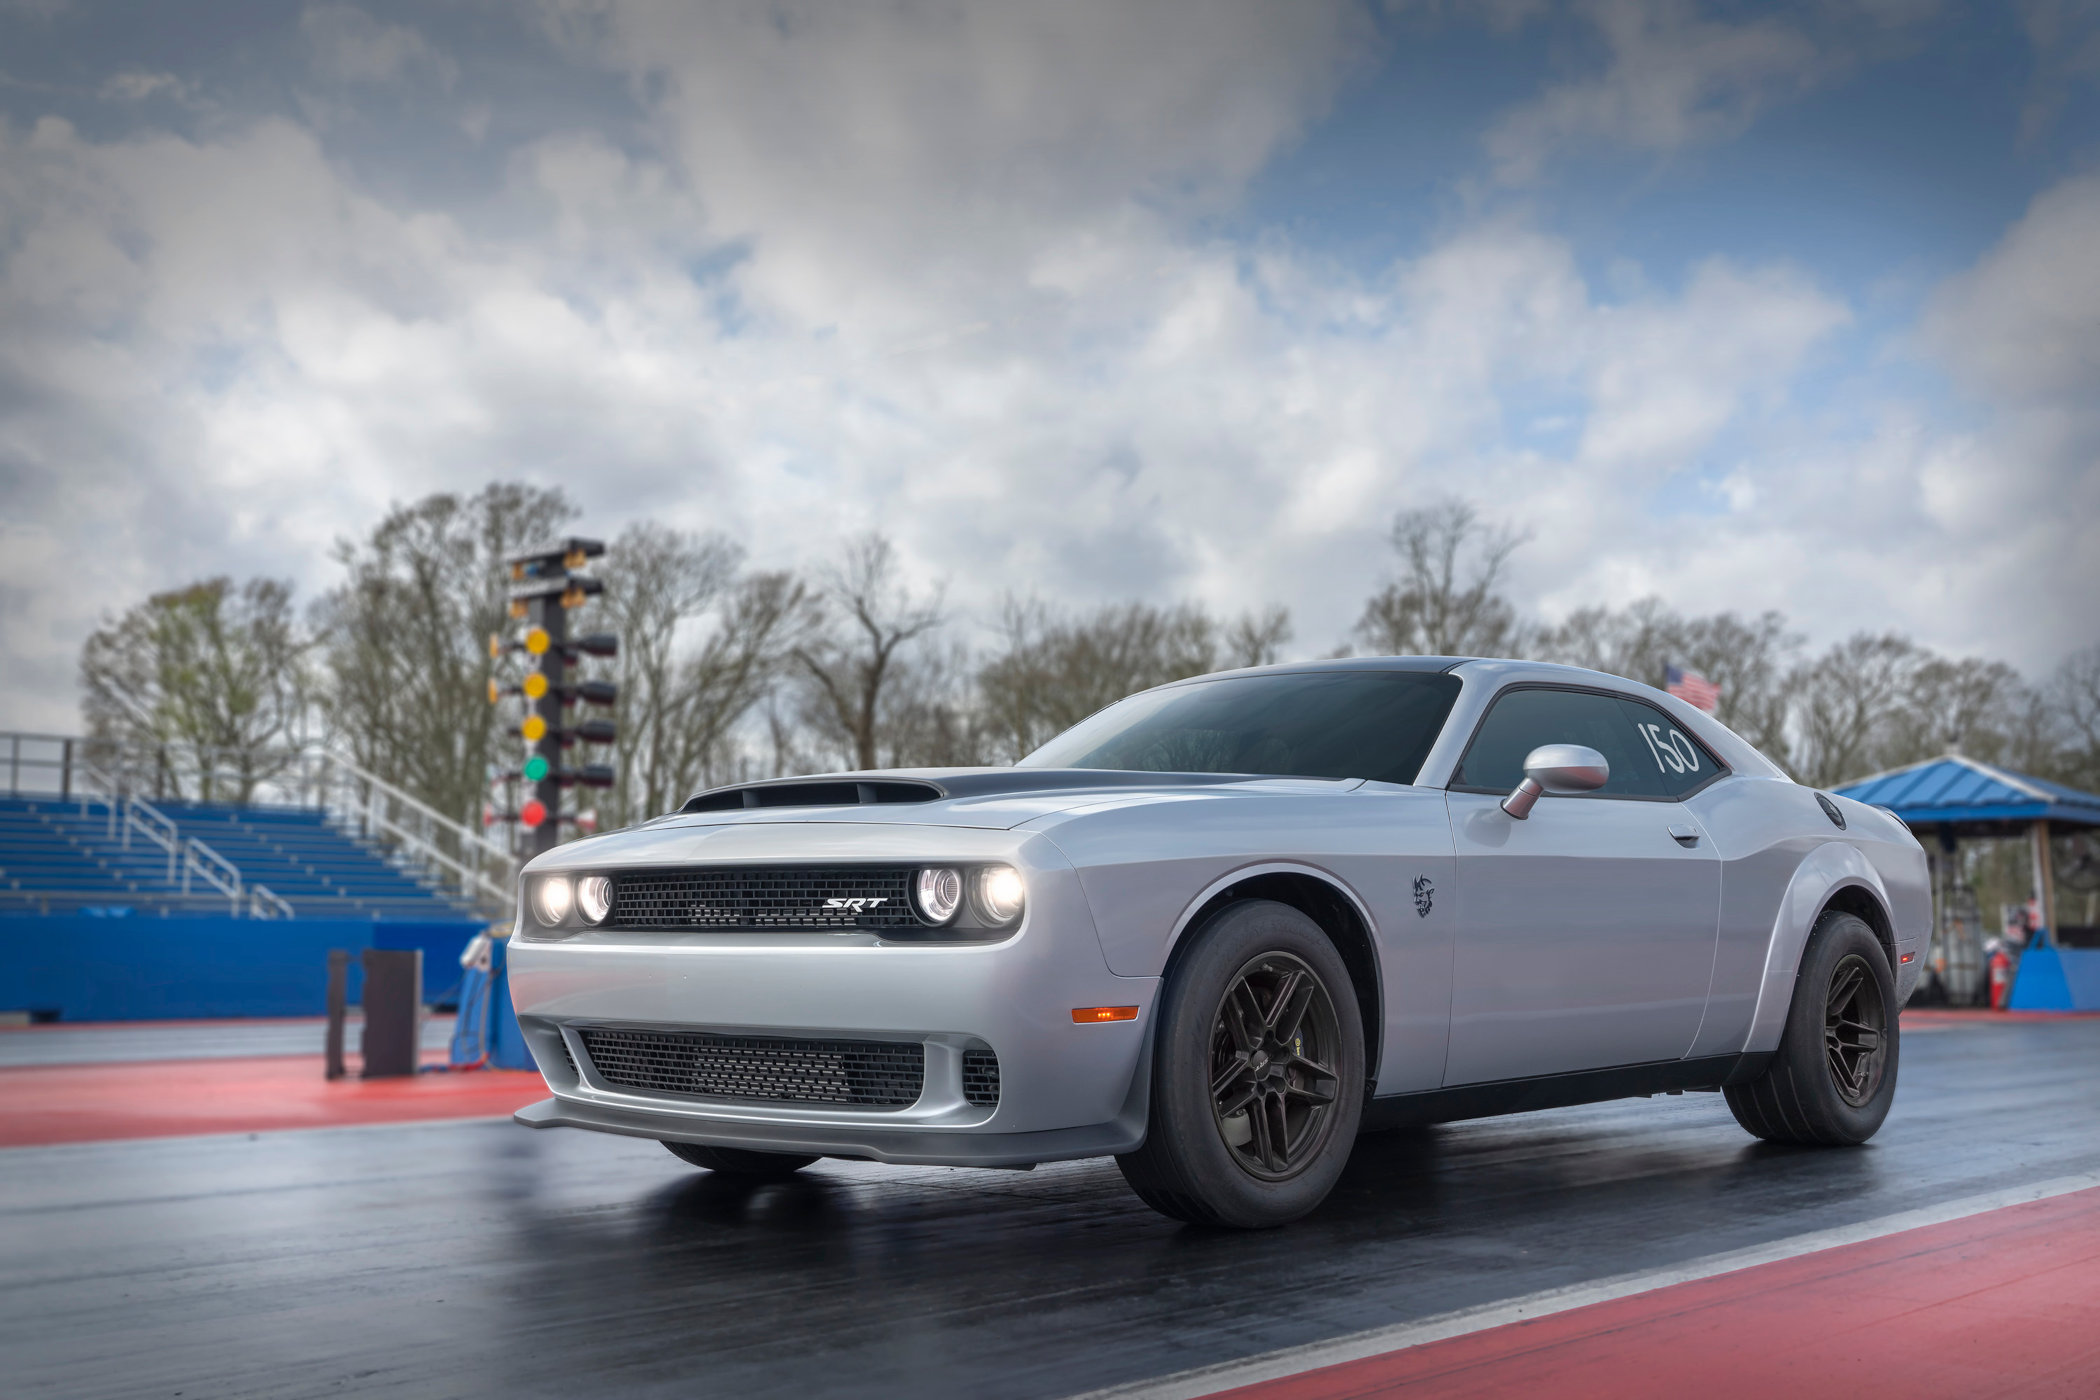 Dodge is introducing the quickest, fastest and most powerful mus